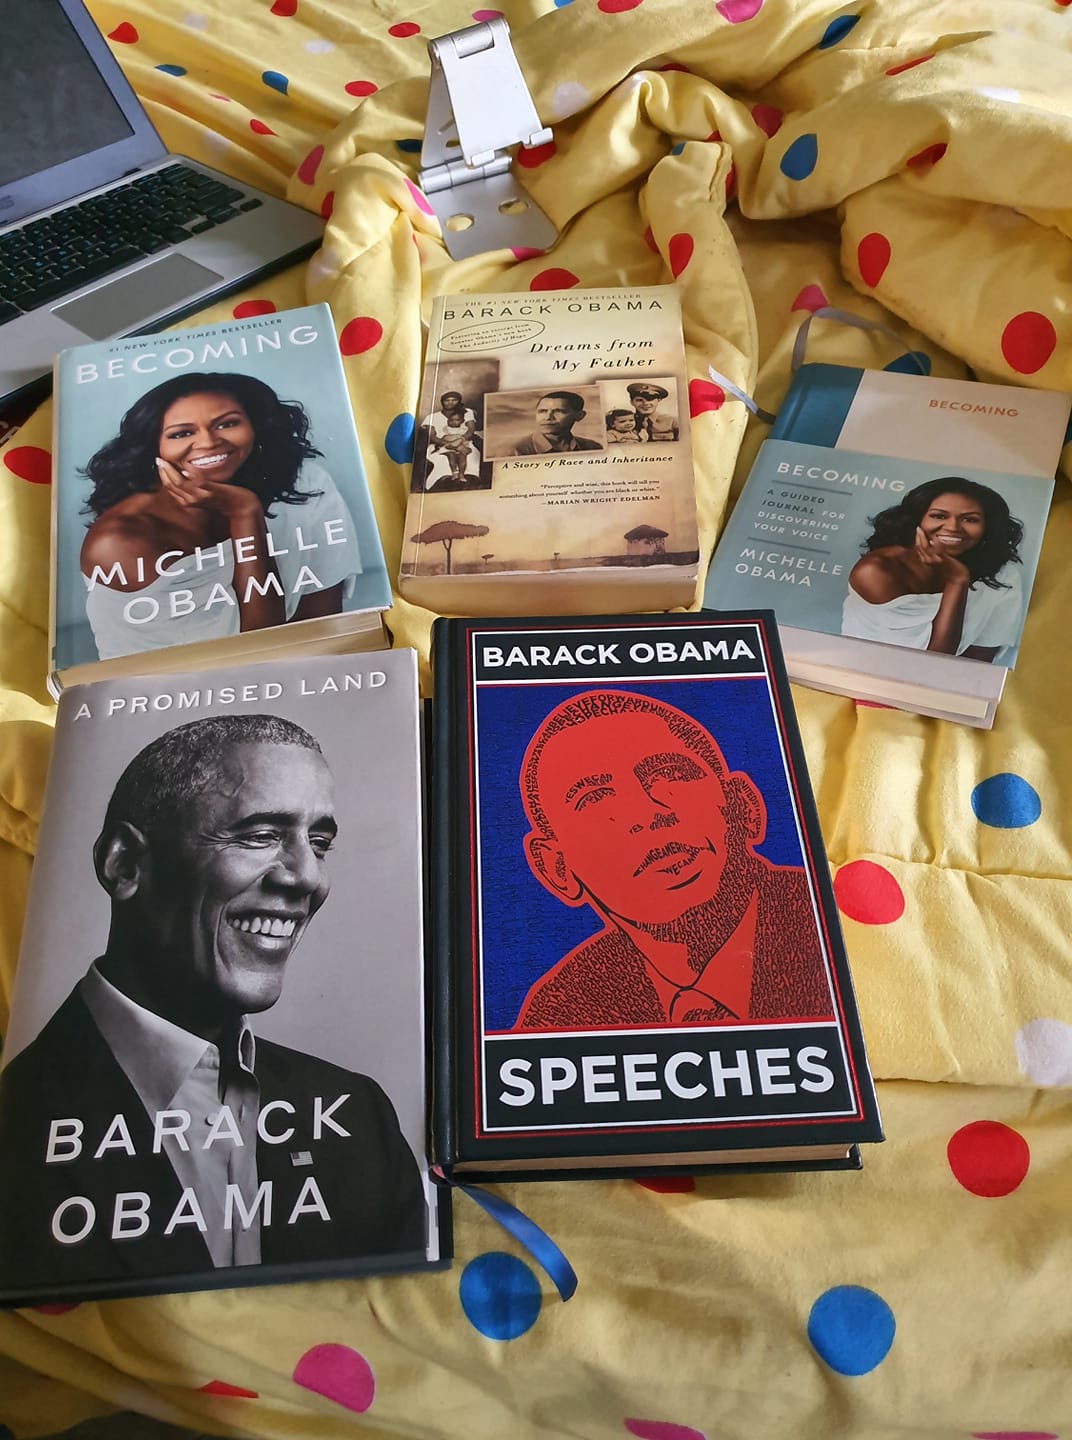 My love for Barack and Michelle Obama….